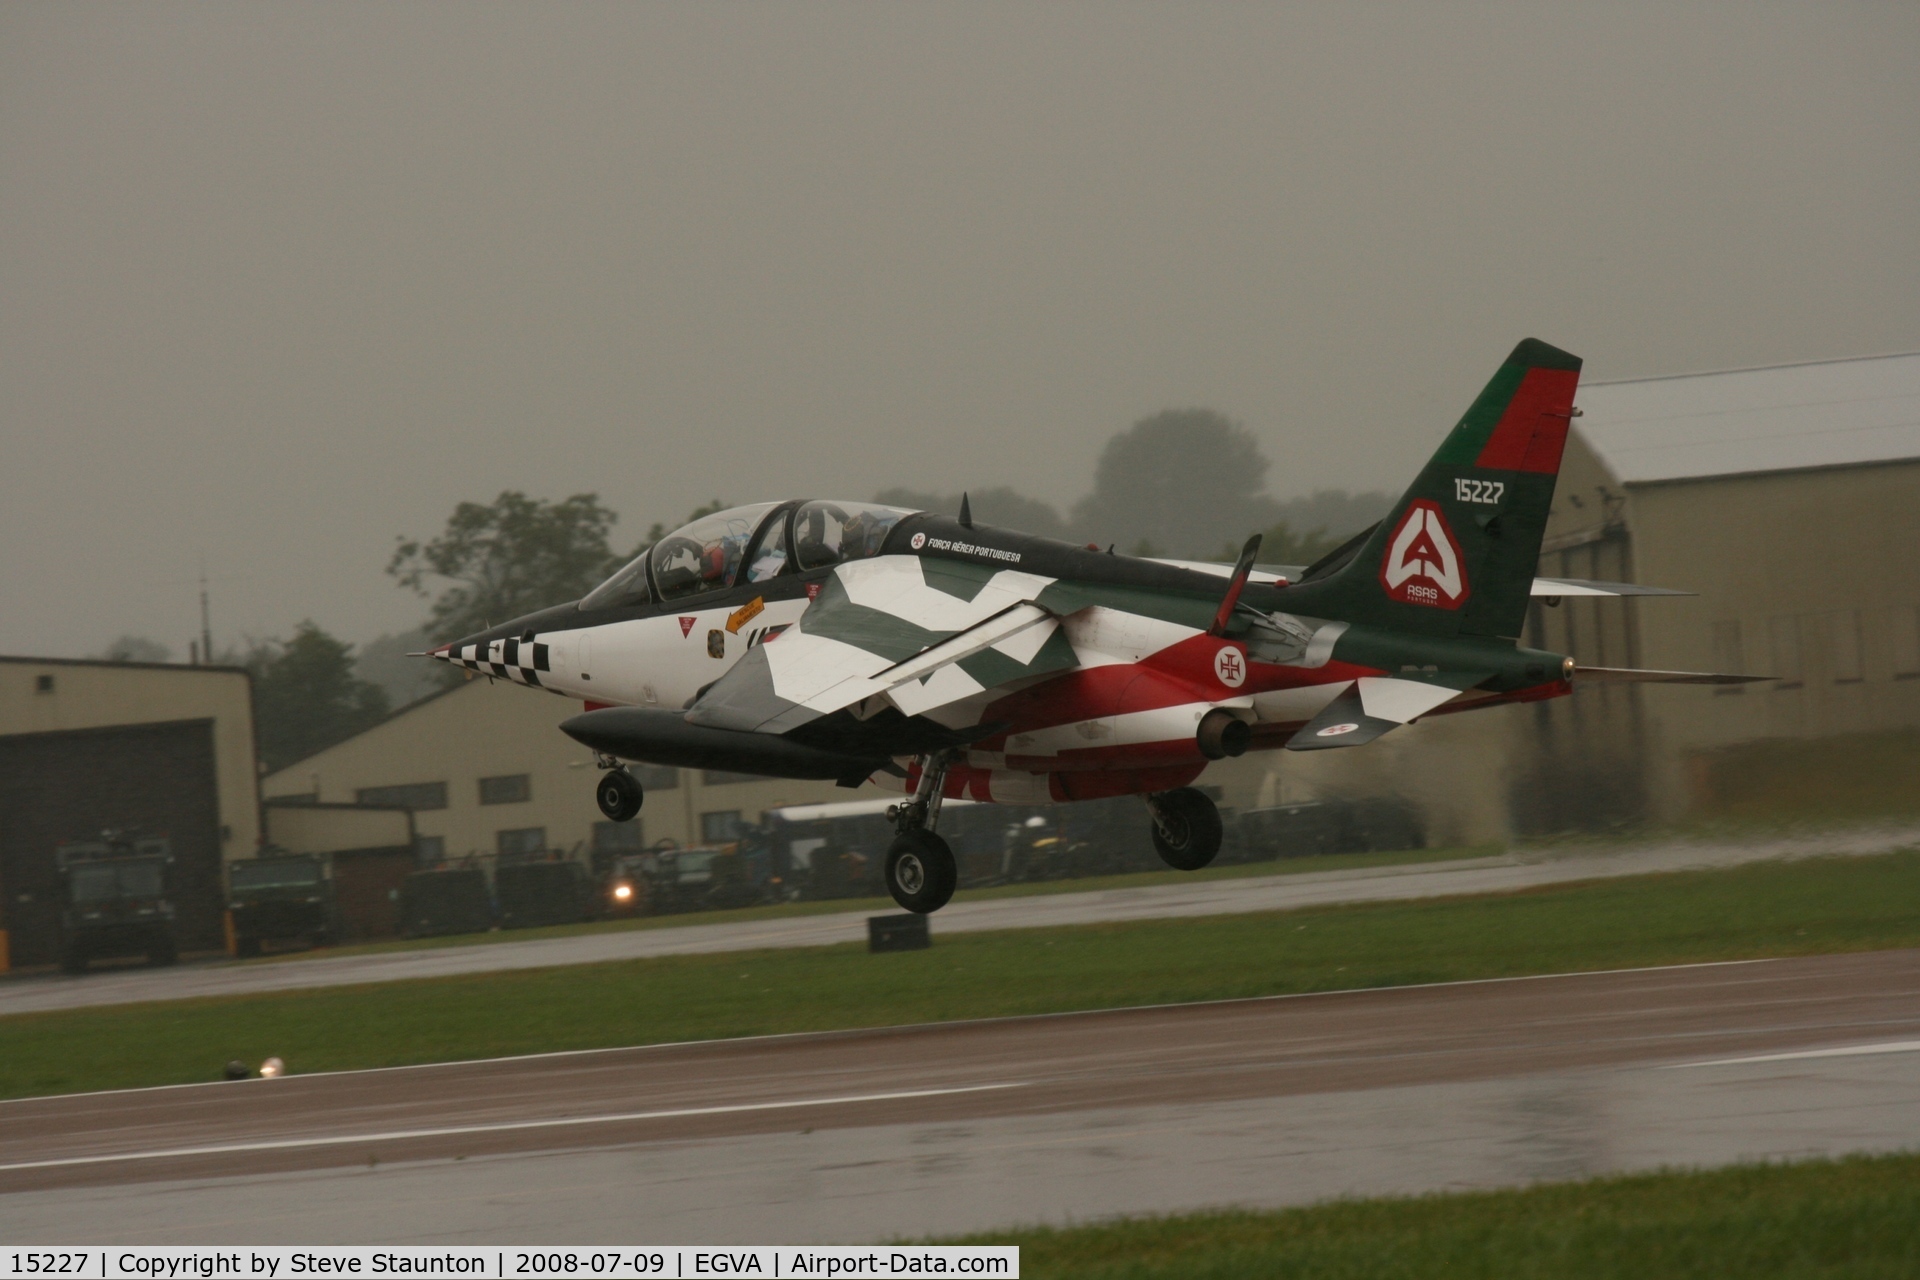 15227, Dassault-Dornier Alpha Jet A C/N 0084, Taken at the Royal International Air Tattoo 2008 during arrivals and departures (show days cancelled due to bad weather)